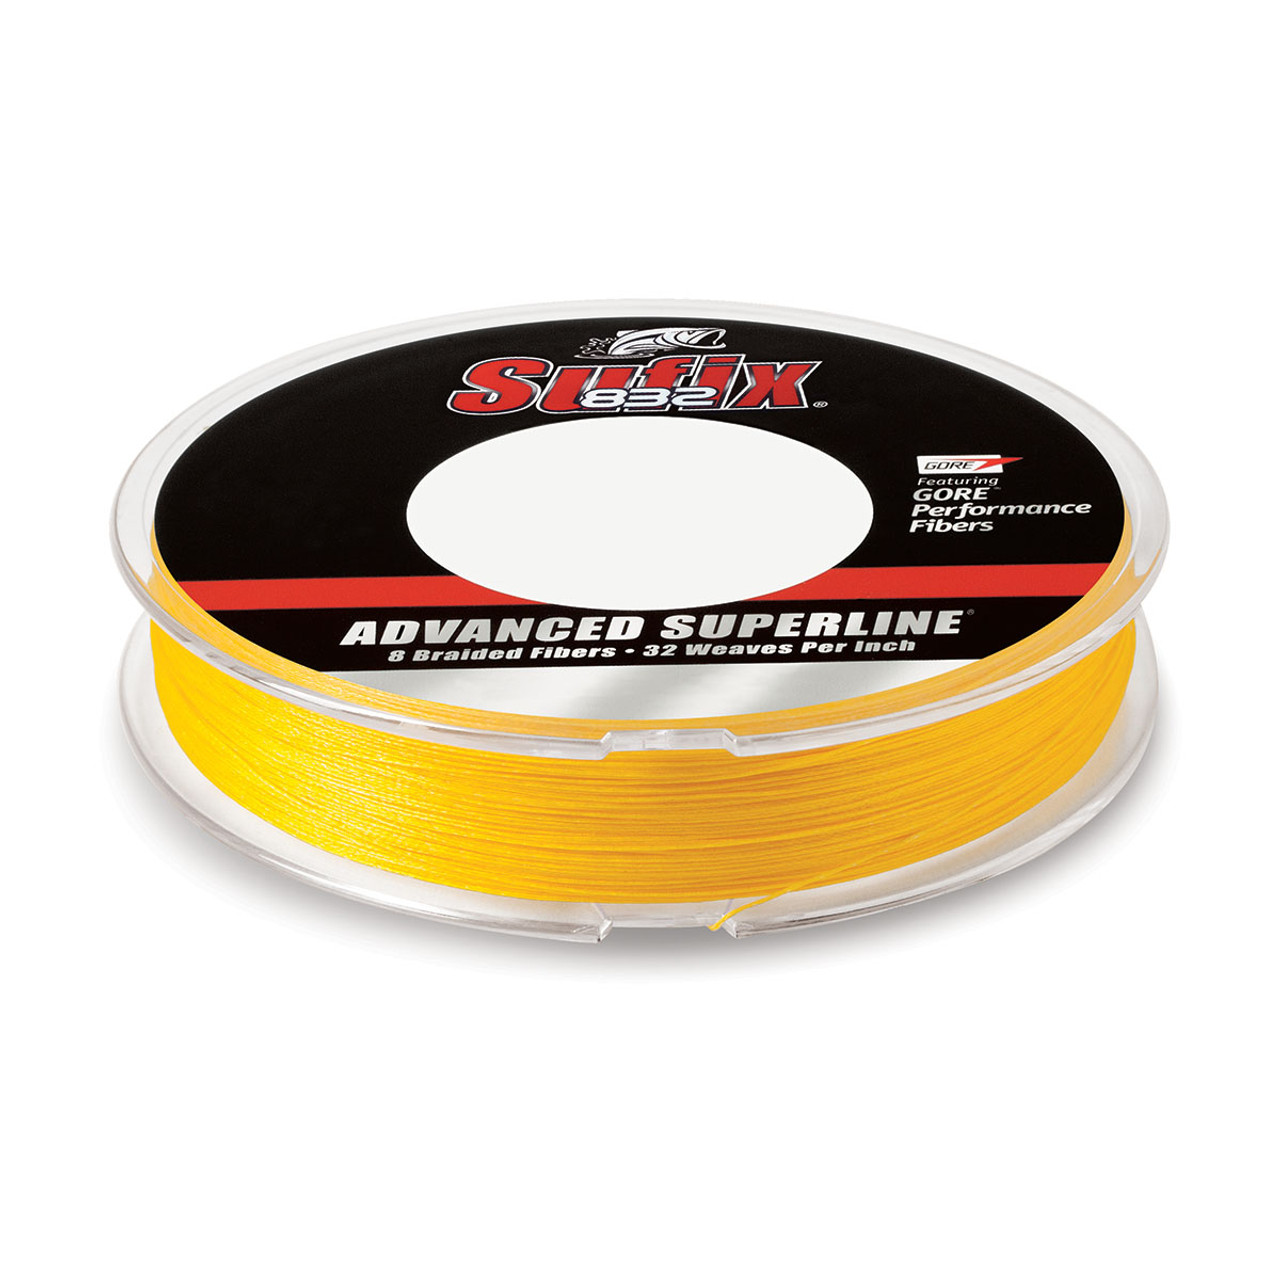 Trombly's - Superlines / Braided Fishing Line